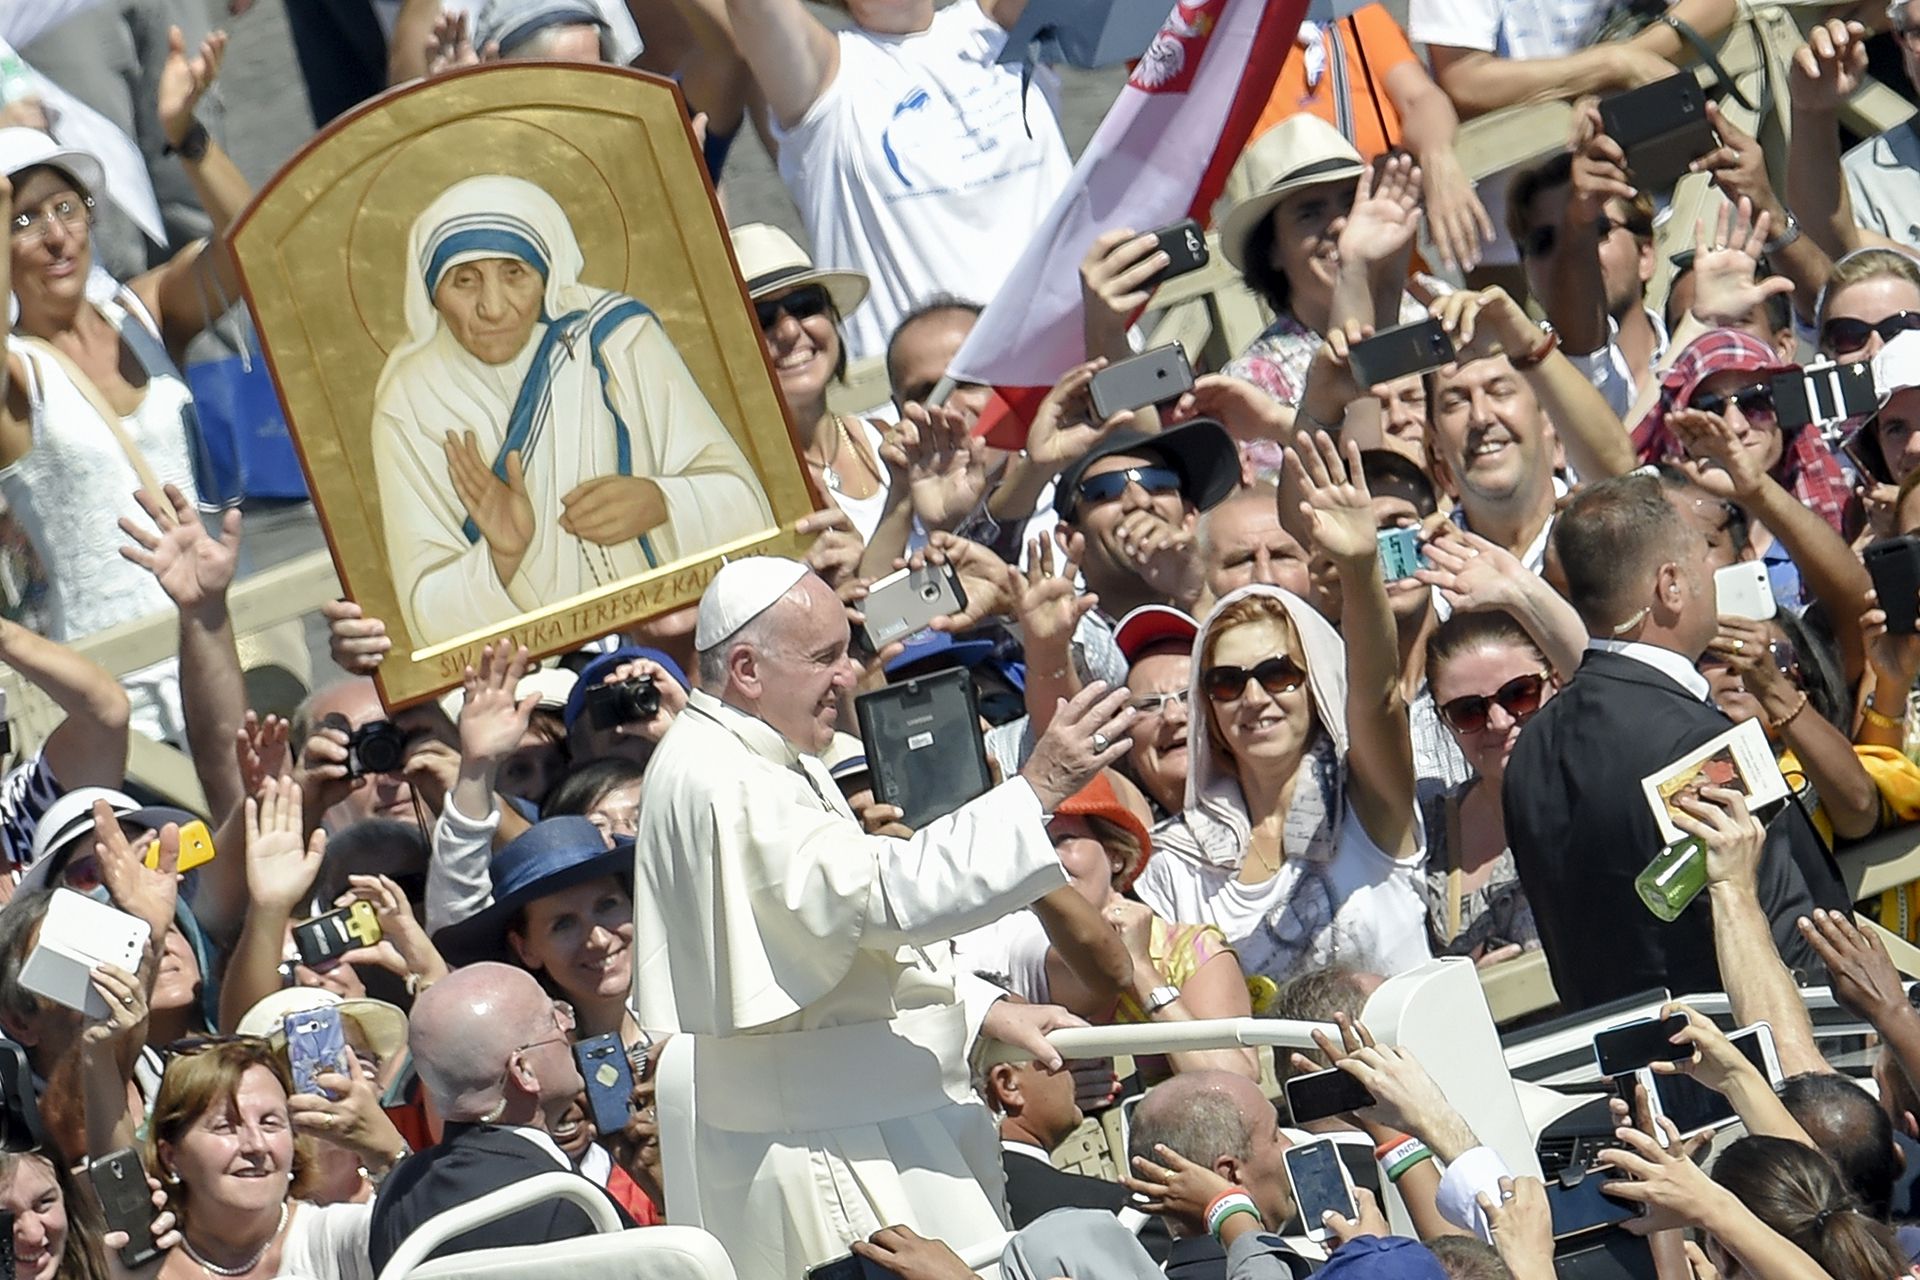 Pope Francis after the canonization of Mother Teresa of Calcutta, in St. Peter's Square in the Vatican, on September 4, 2016. (AFP/ANDREAS SOLARO)